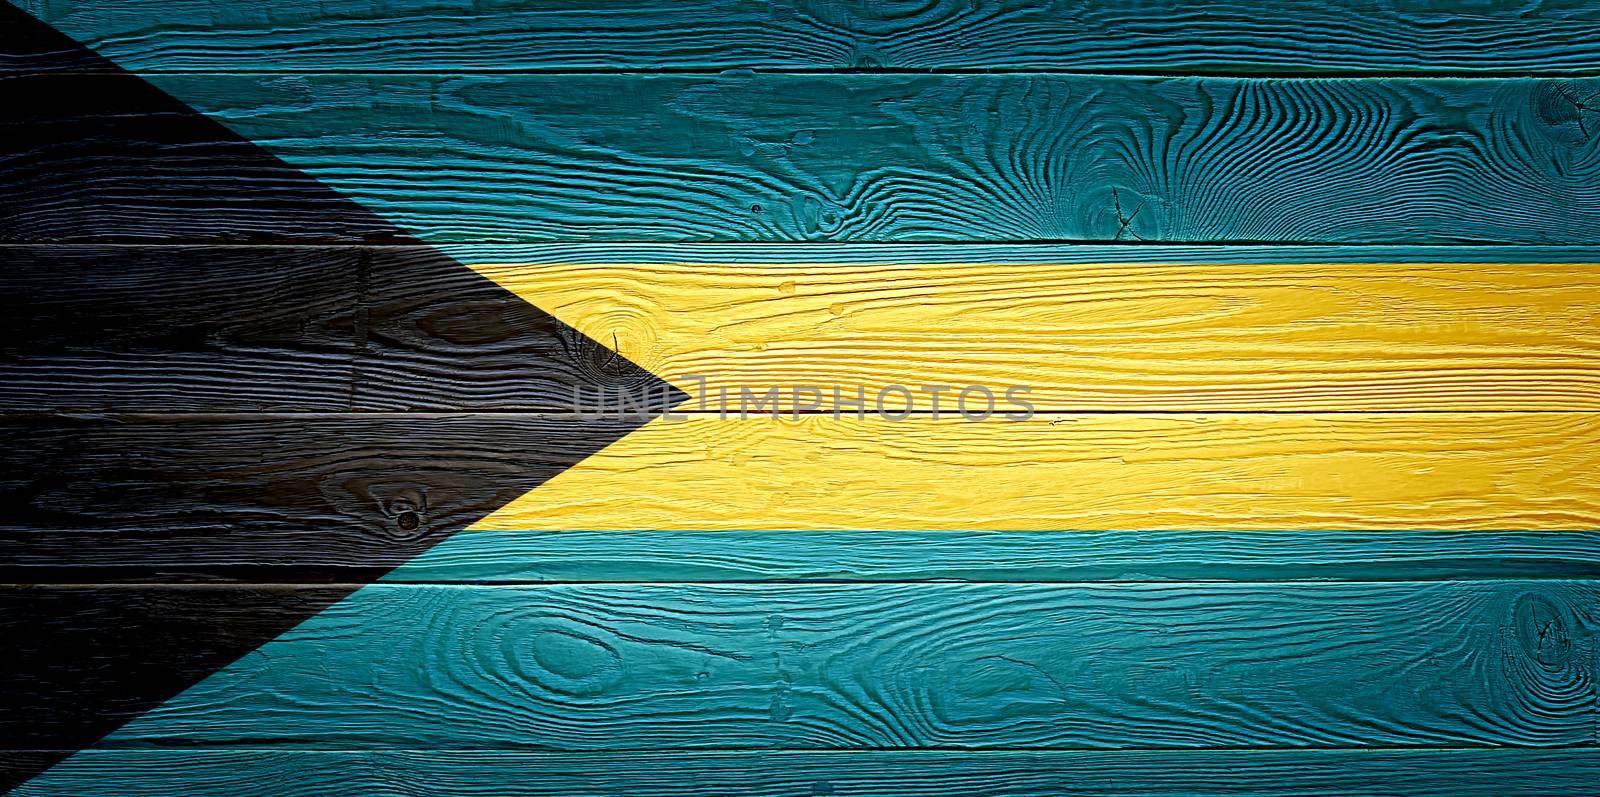 Bahamas flag painted on old wood plank background. Brushed natural light knotted wooden board texture. Wooden texture background flag of Bahamas. by PhotoTime